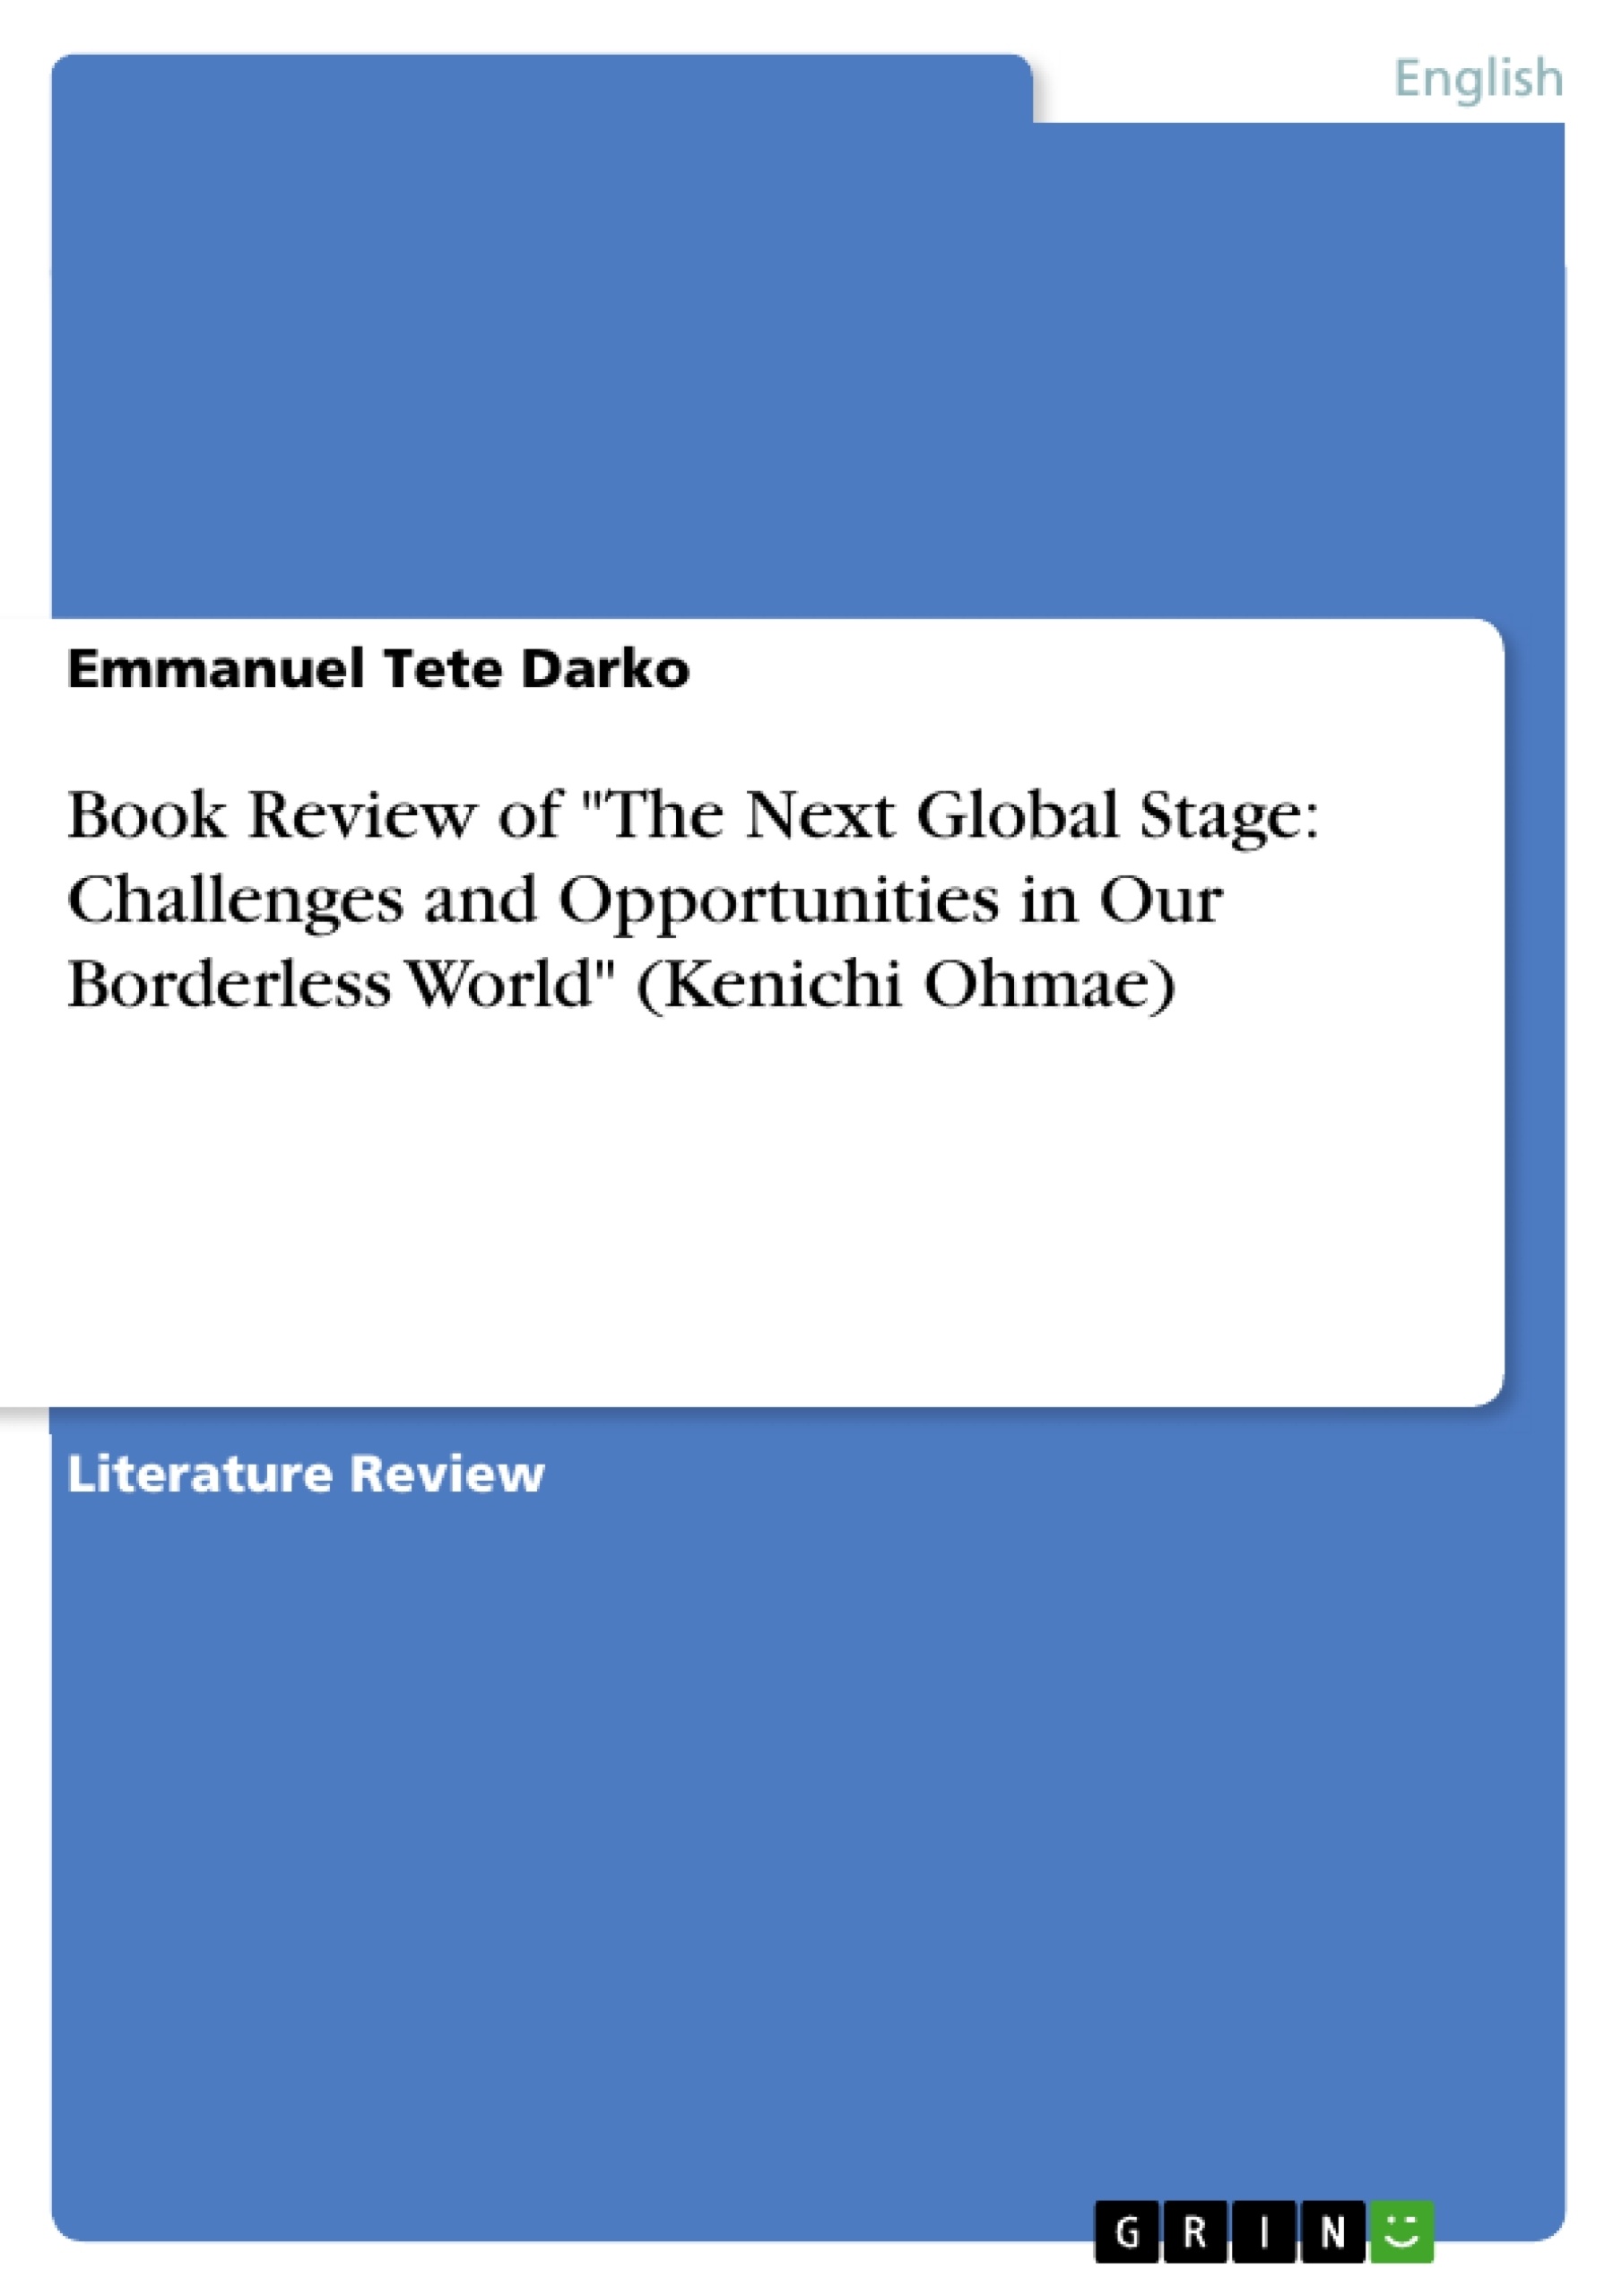 Titre: Book Review of "The Next Global Stage: Challenges and Opportunities in Our Borderless World" (Kenichi Ohmae)